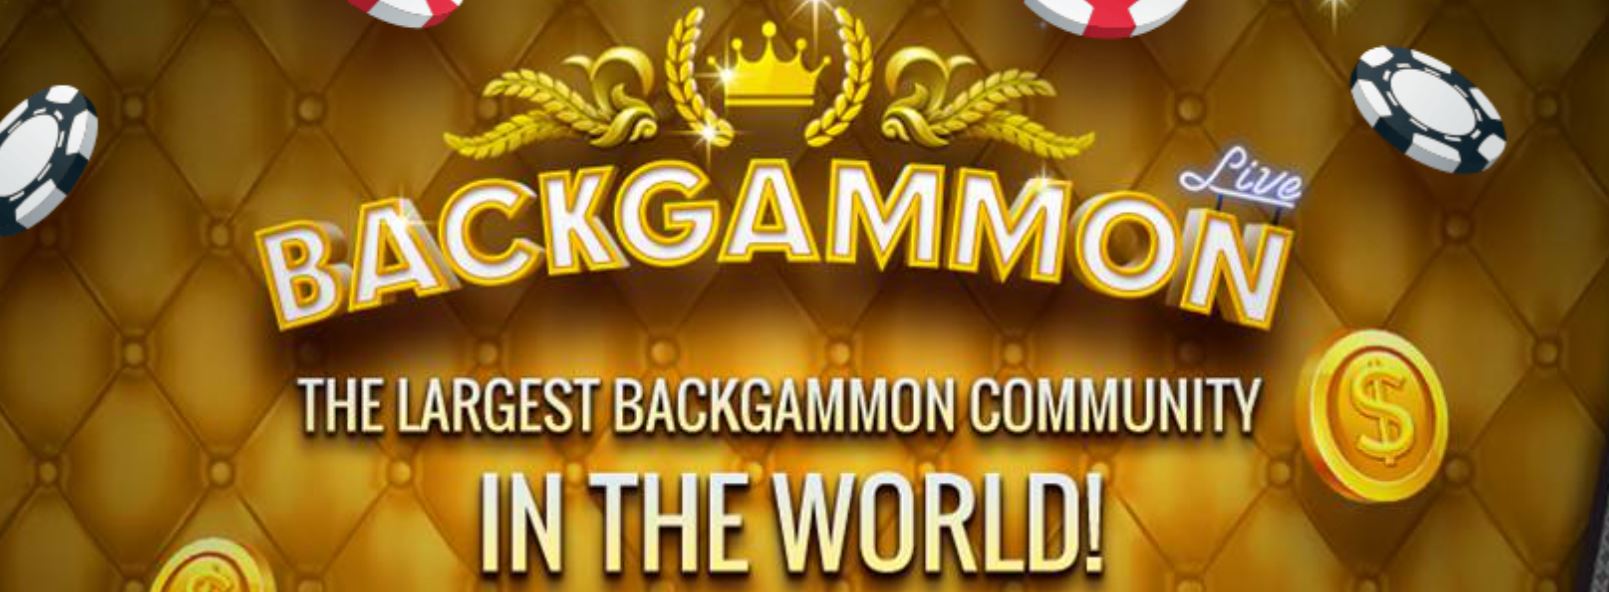 Backgammon is a popular game in online casino rooms.